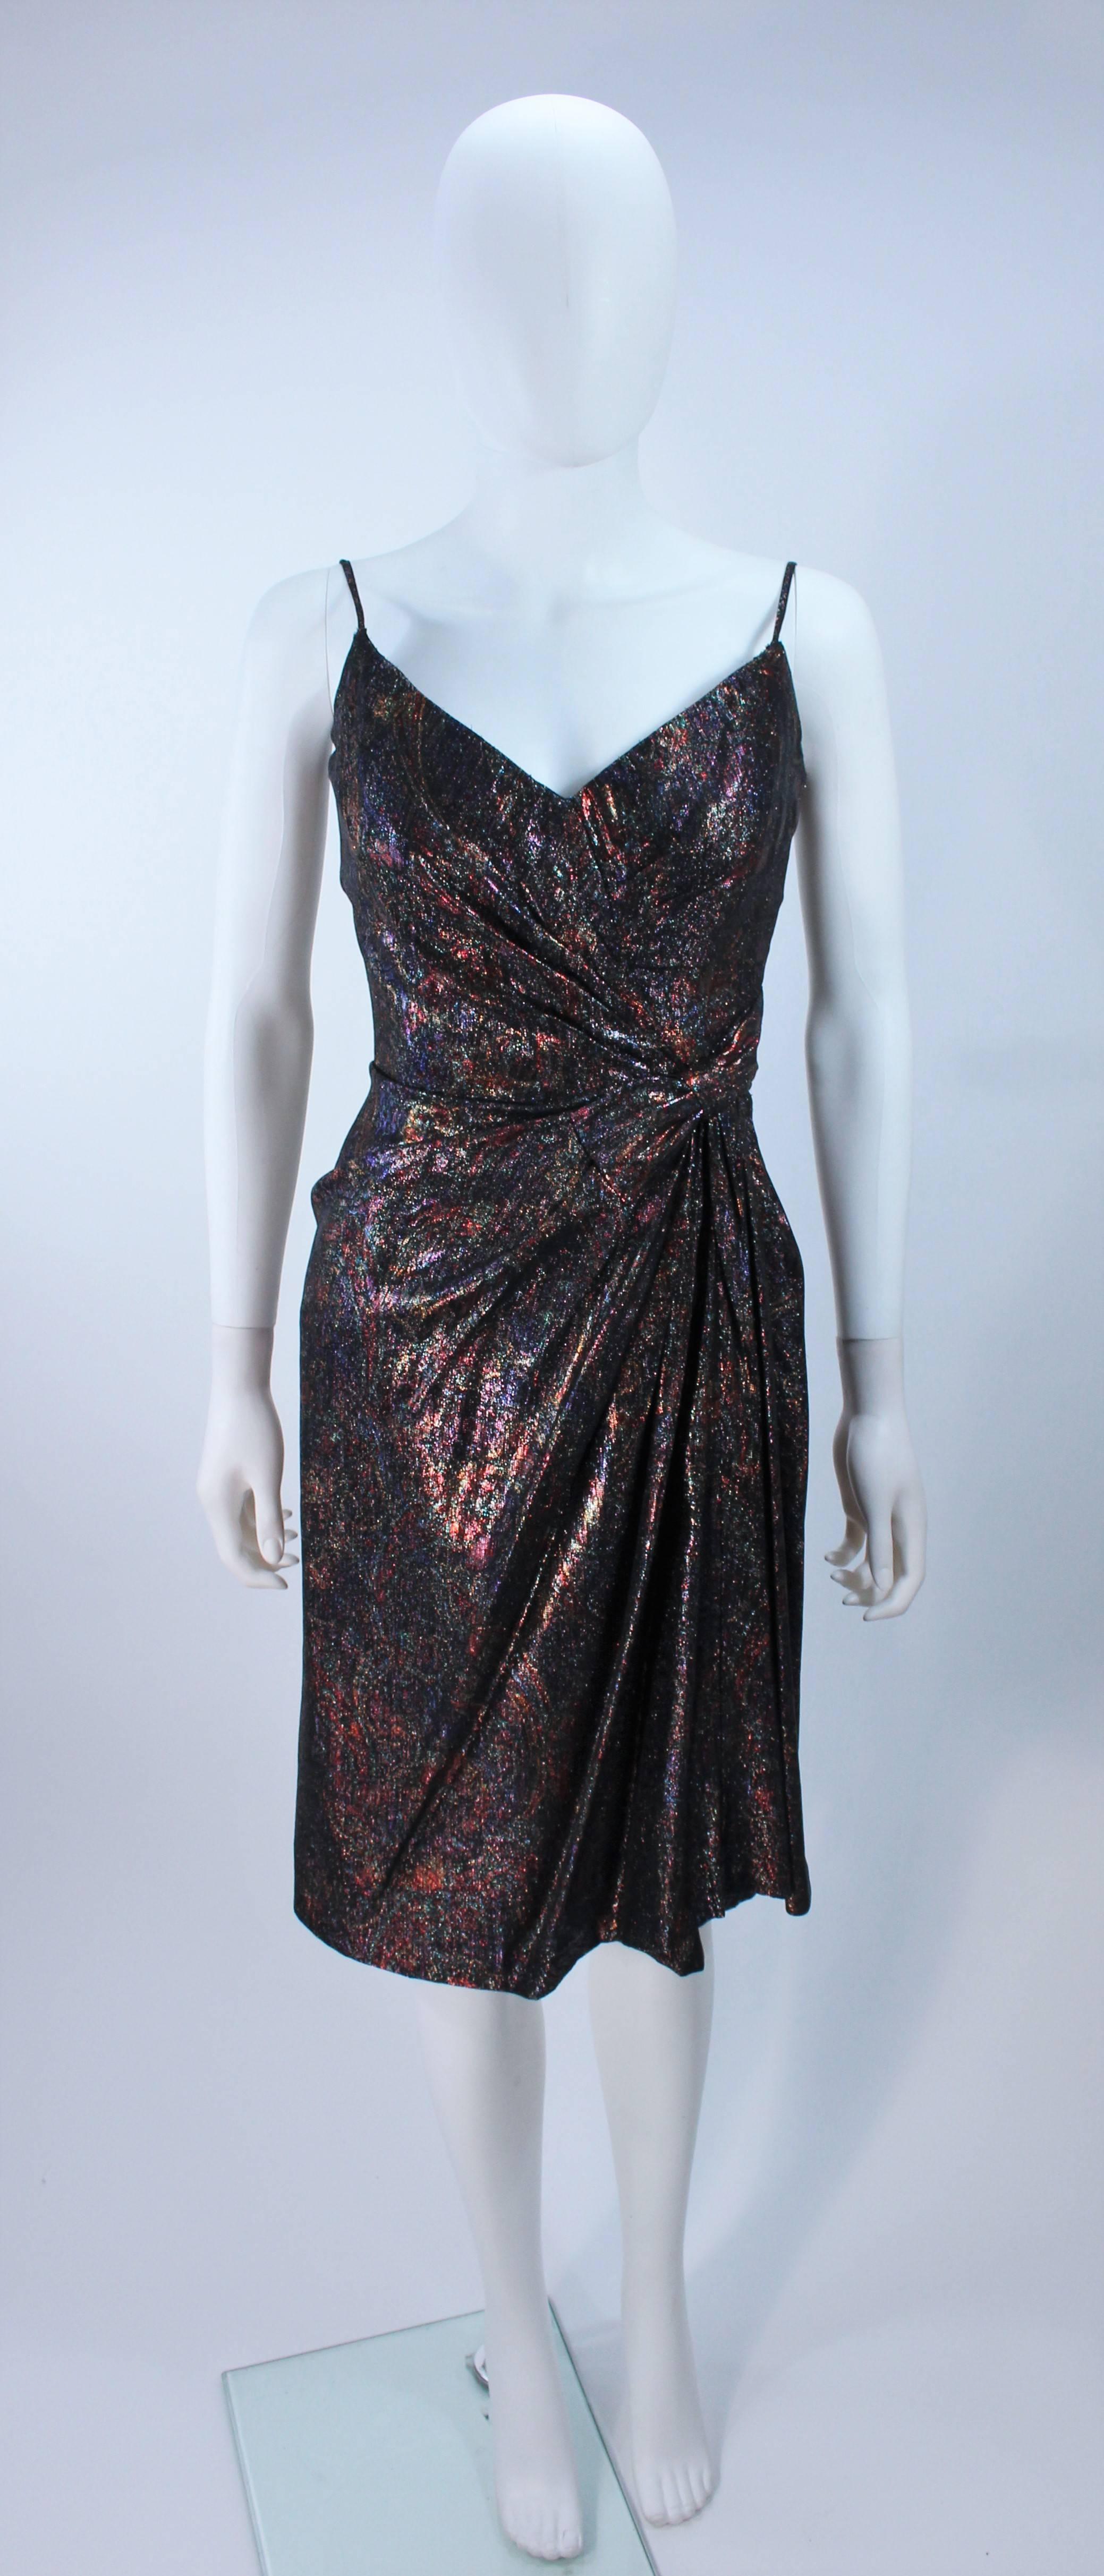  This Nolan Miller cocktail dress is composed of an iridescent metallic bronze and purple paisley print fabric with a draped design detail. There is a center back zipper closure, with interior boning. In great vintage condition. 

  **Please